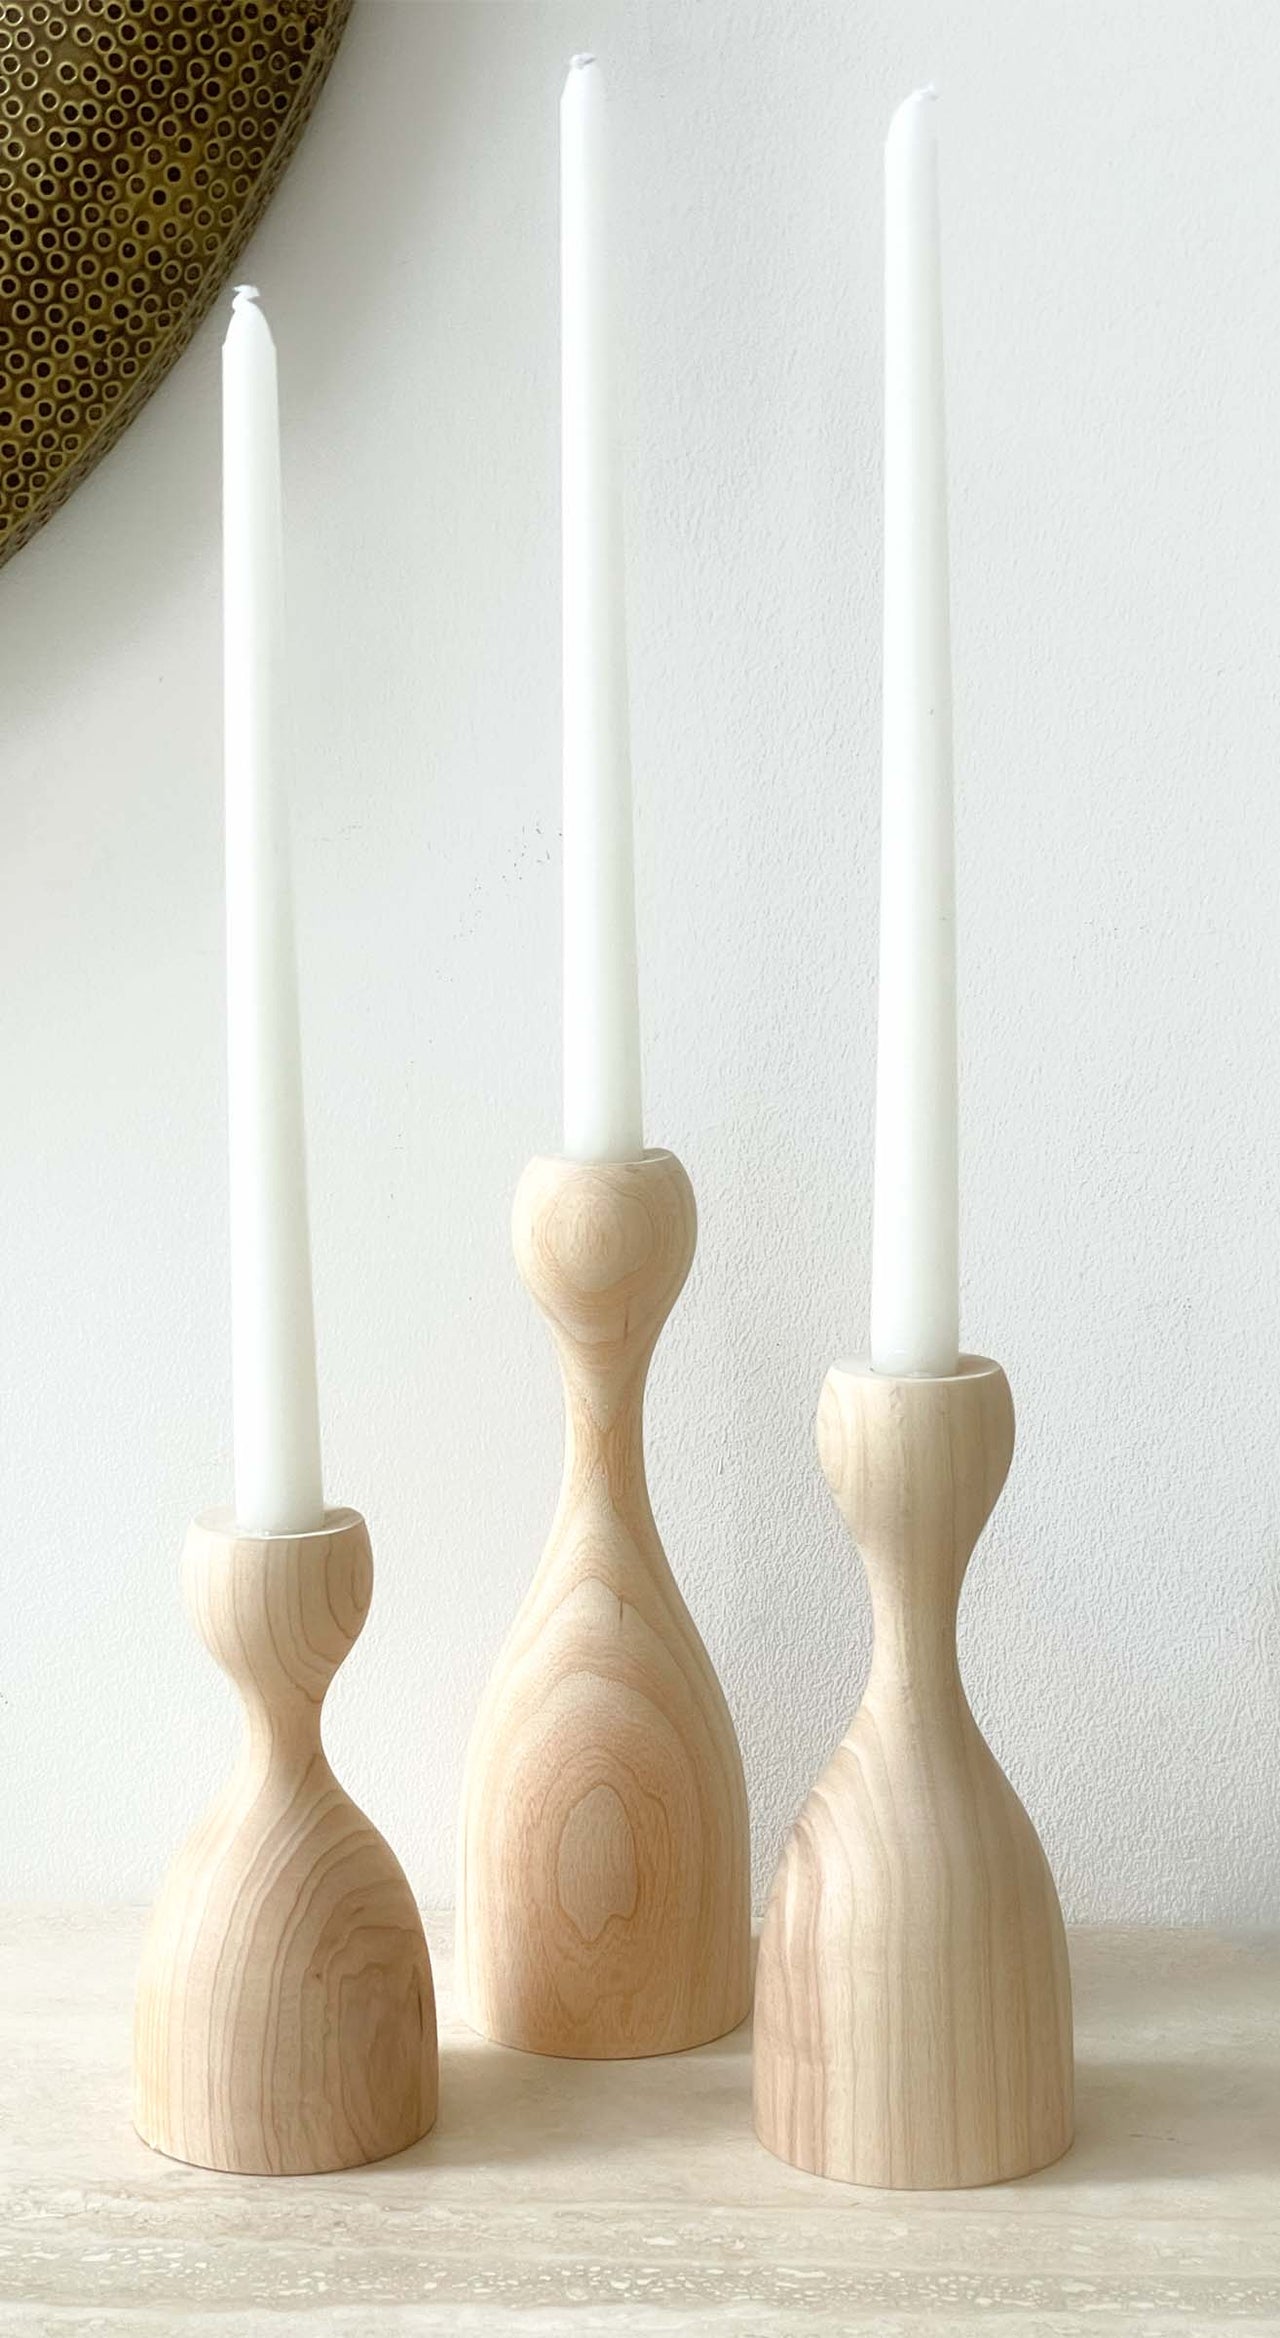 Wooden Scandinavian Style Candle Holders